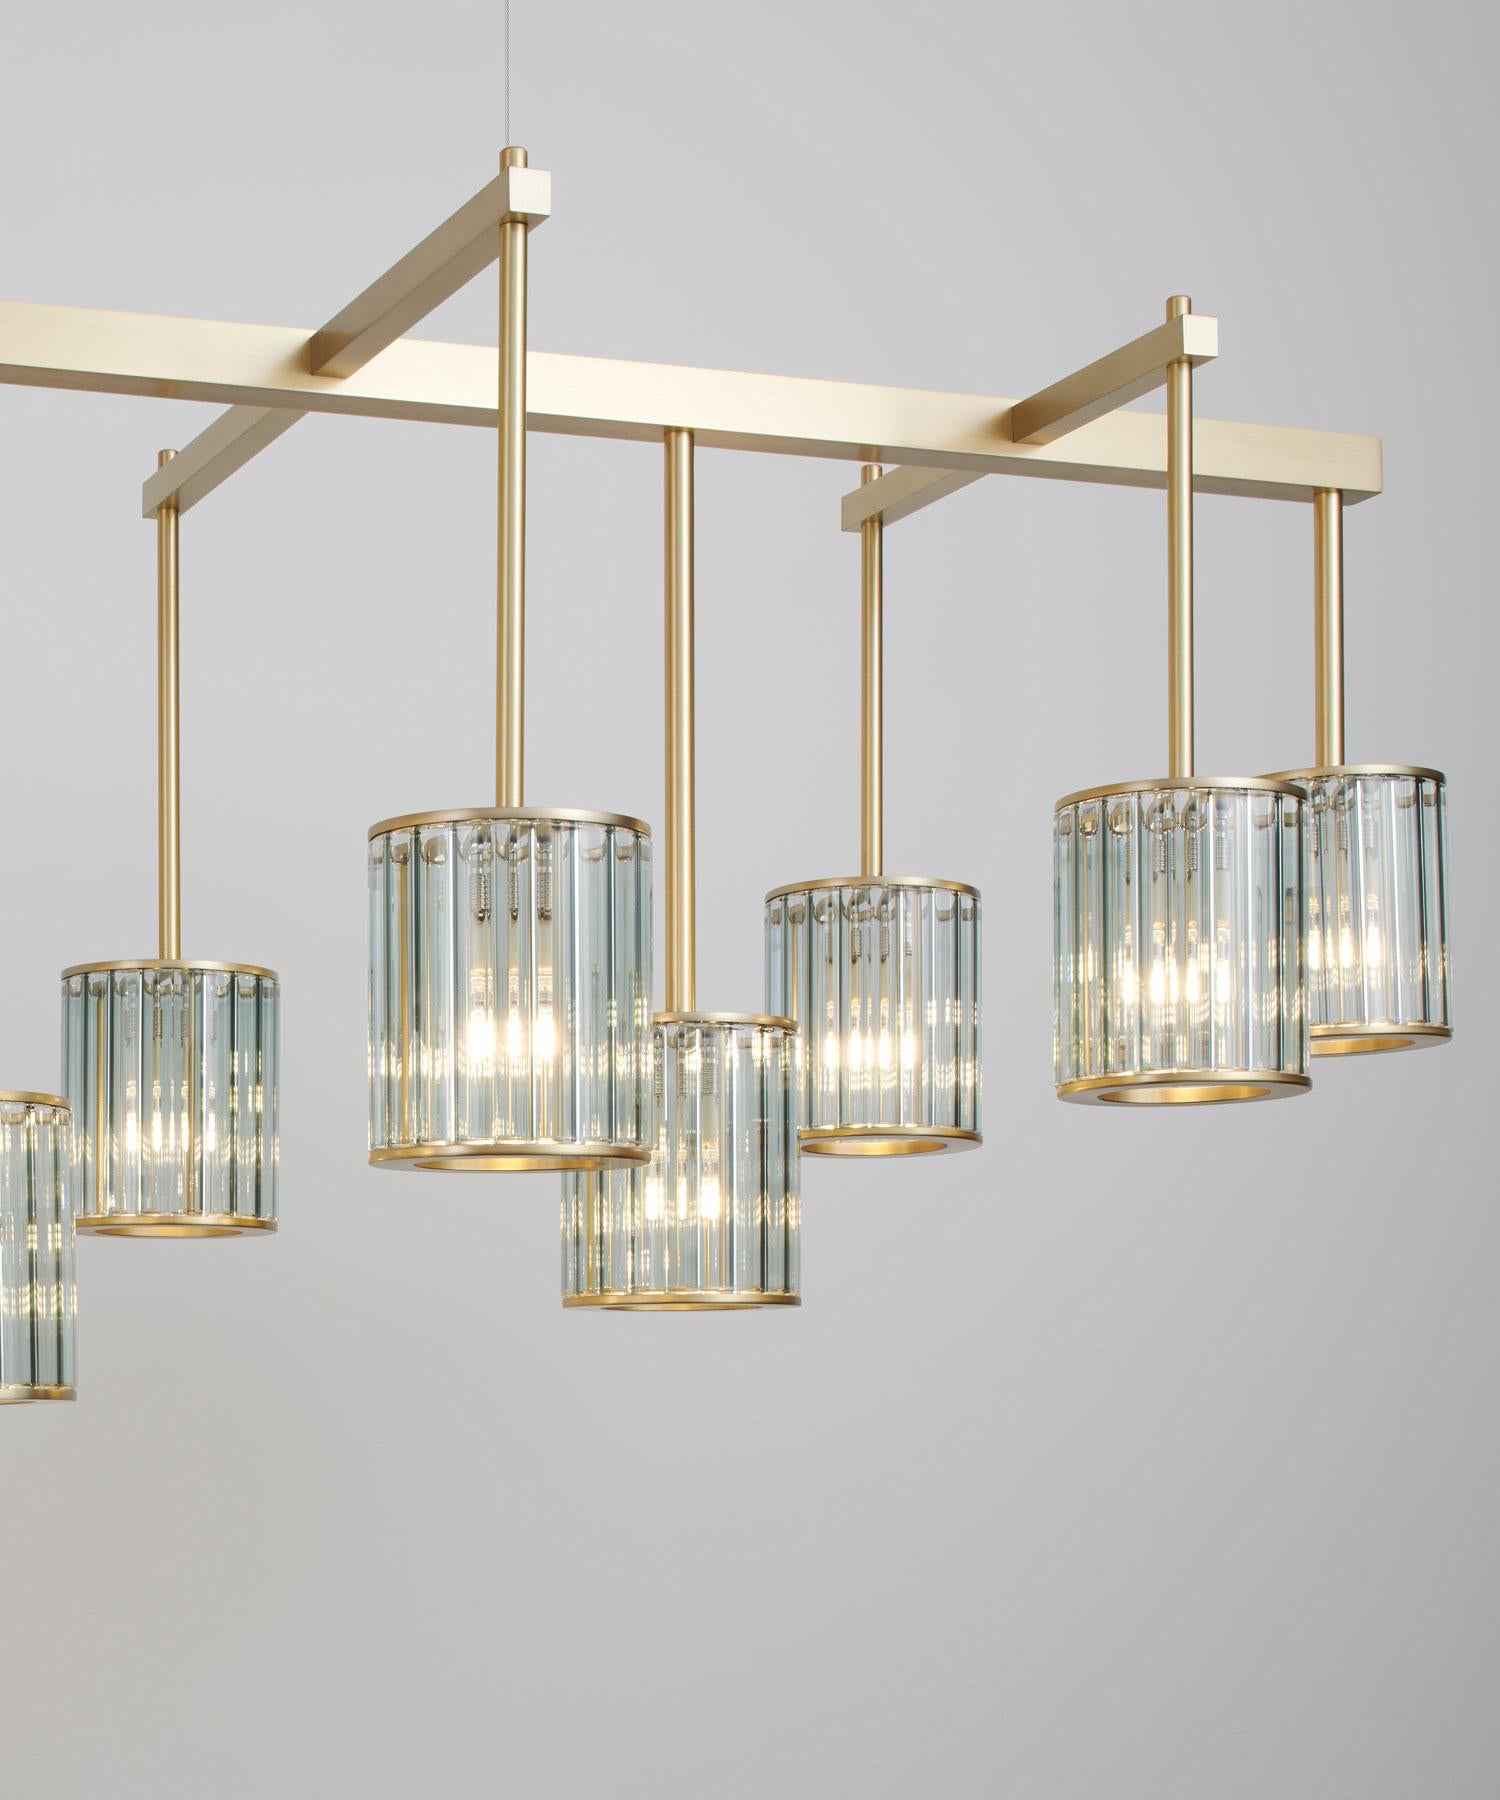 British Flute Beam Chandelier with 13 Arms in Brushed Brass and Smoke Glass Diffusers For Sale